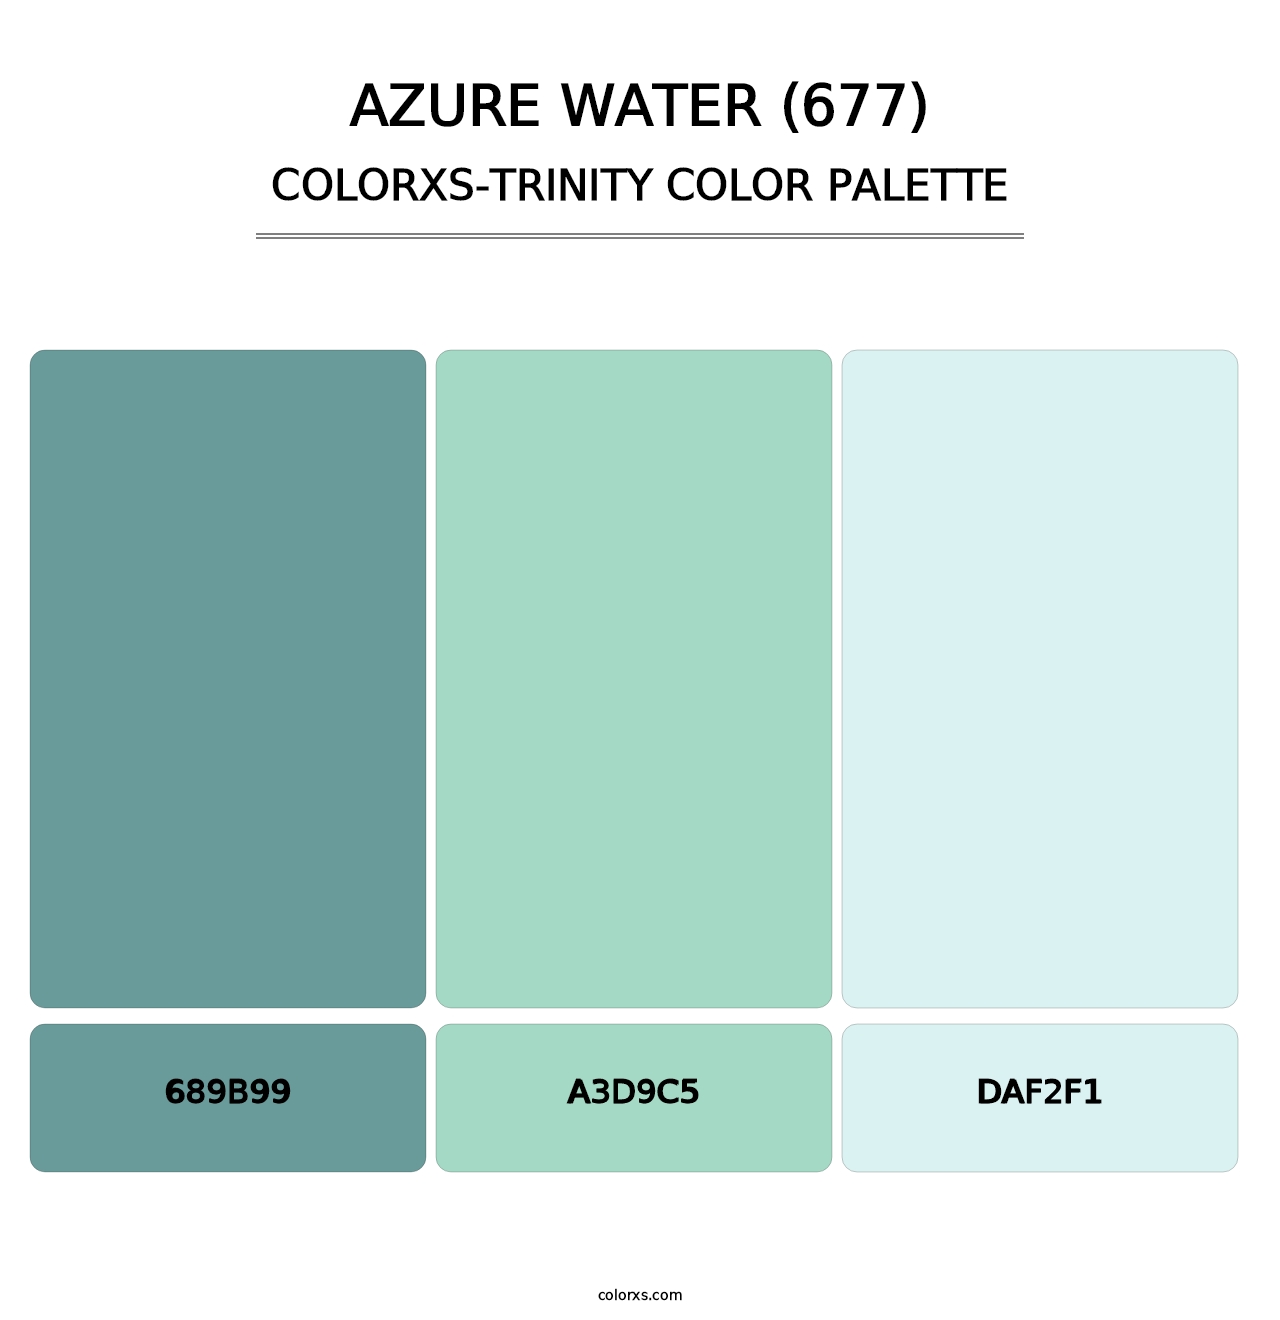 Azure Water (677) - Colorxs Trinity Palette